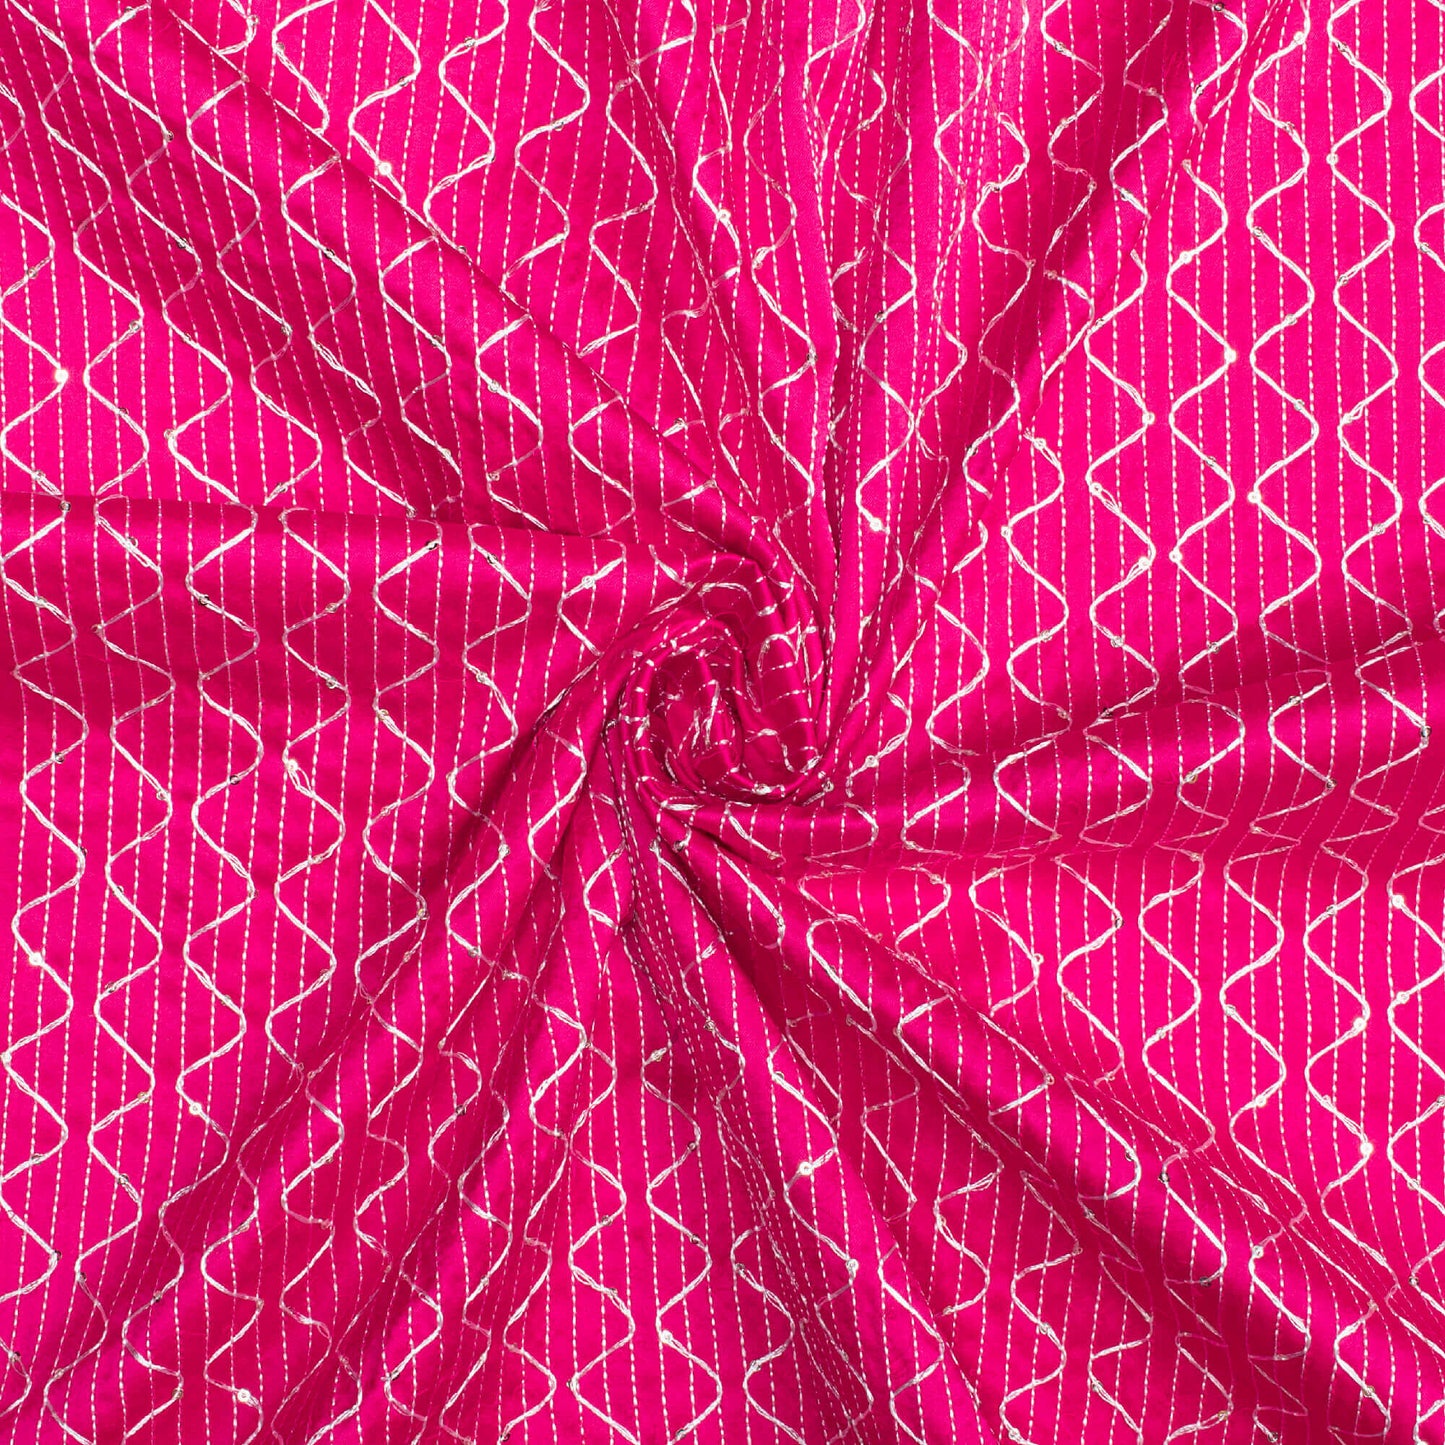 Cerise Pink Plain Sequins Embroidery Charmeuse Satin Fabric (Width 54 Inches)